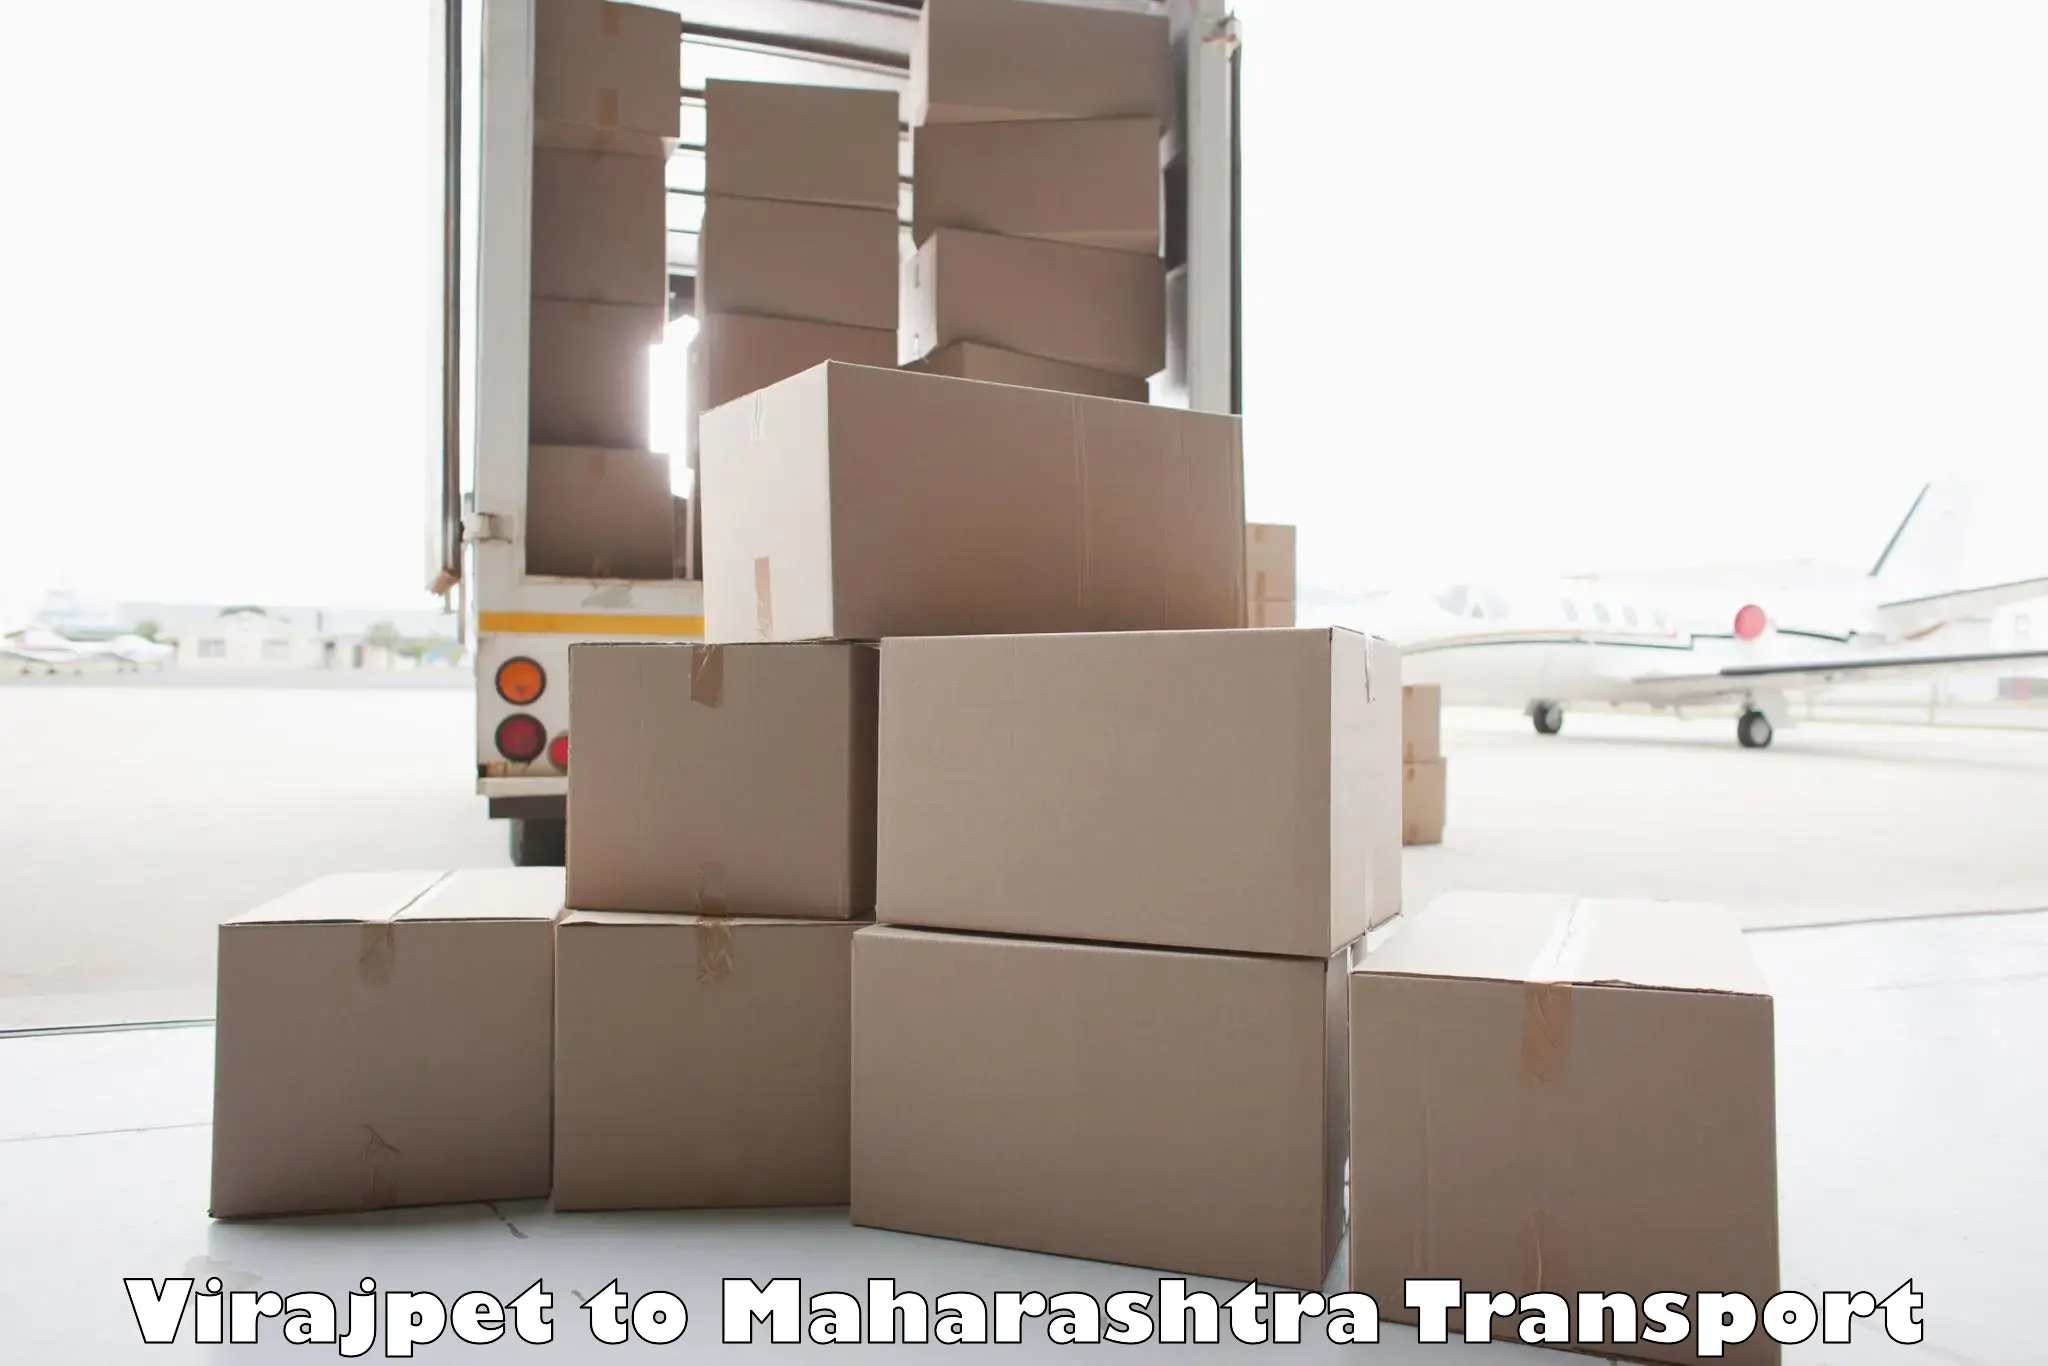 Commercial transport service Virajpet to Bhiwandi